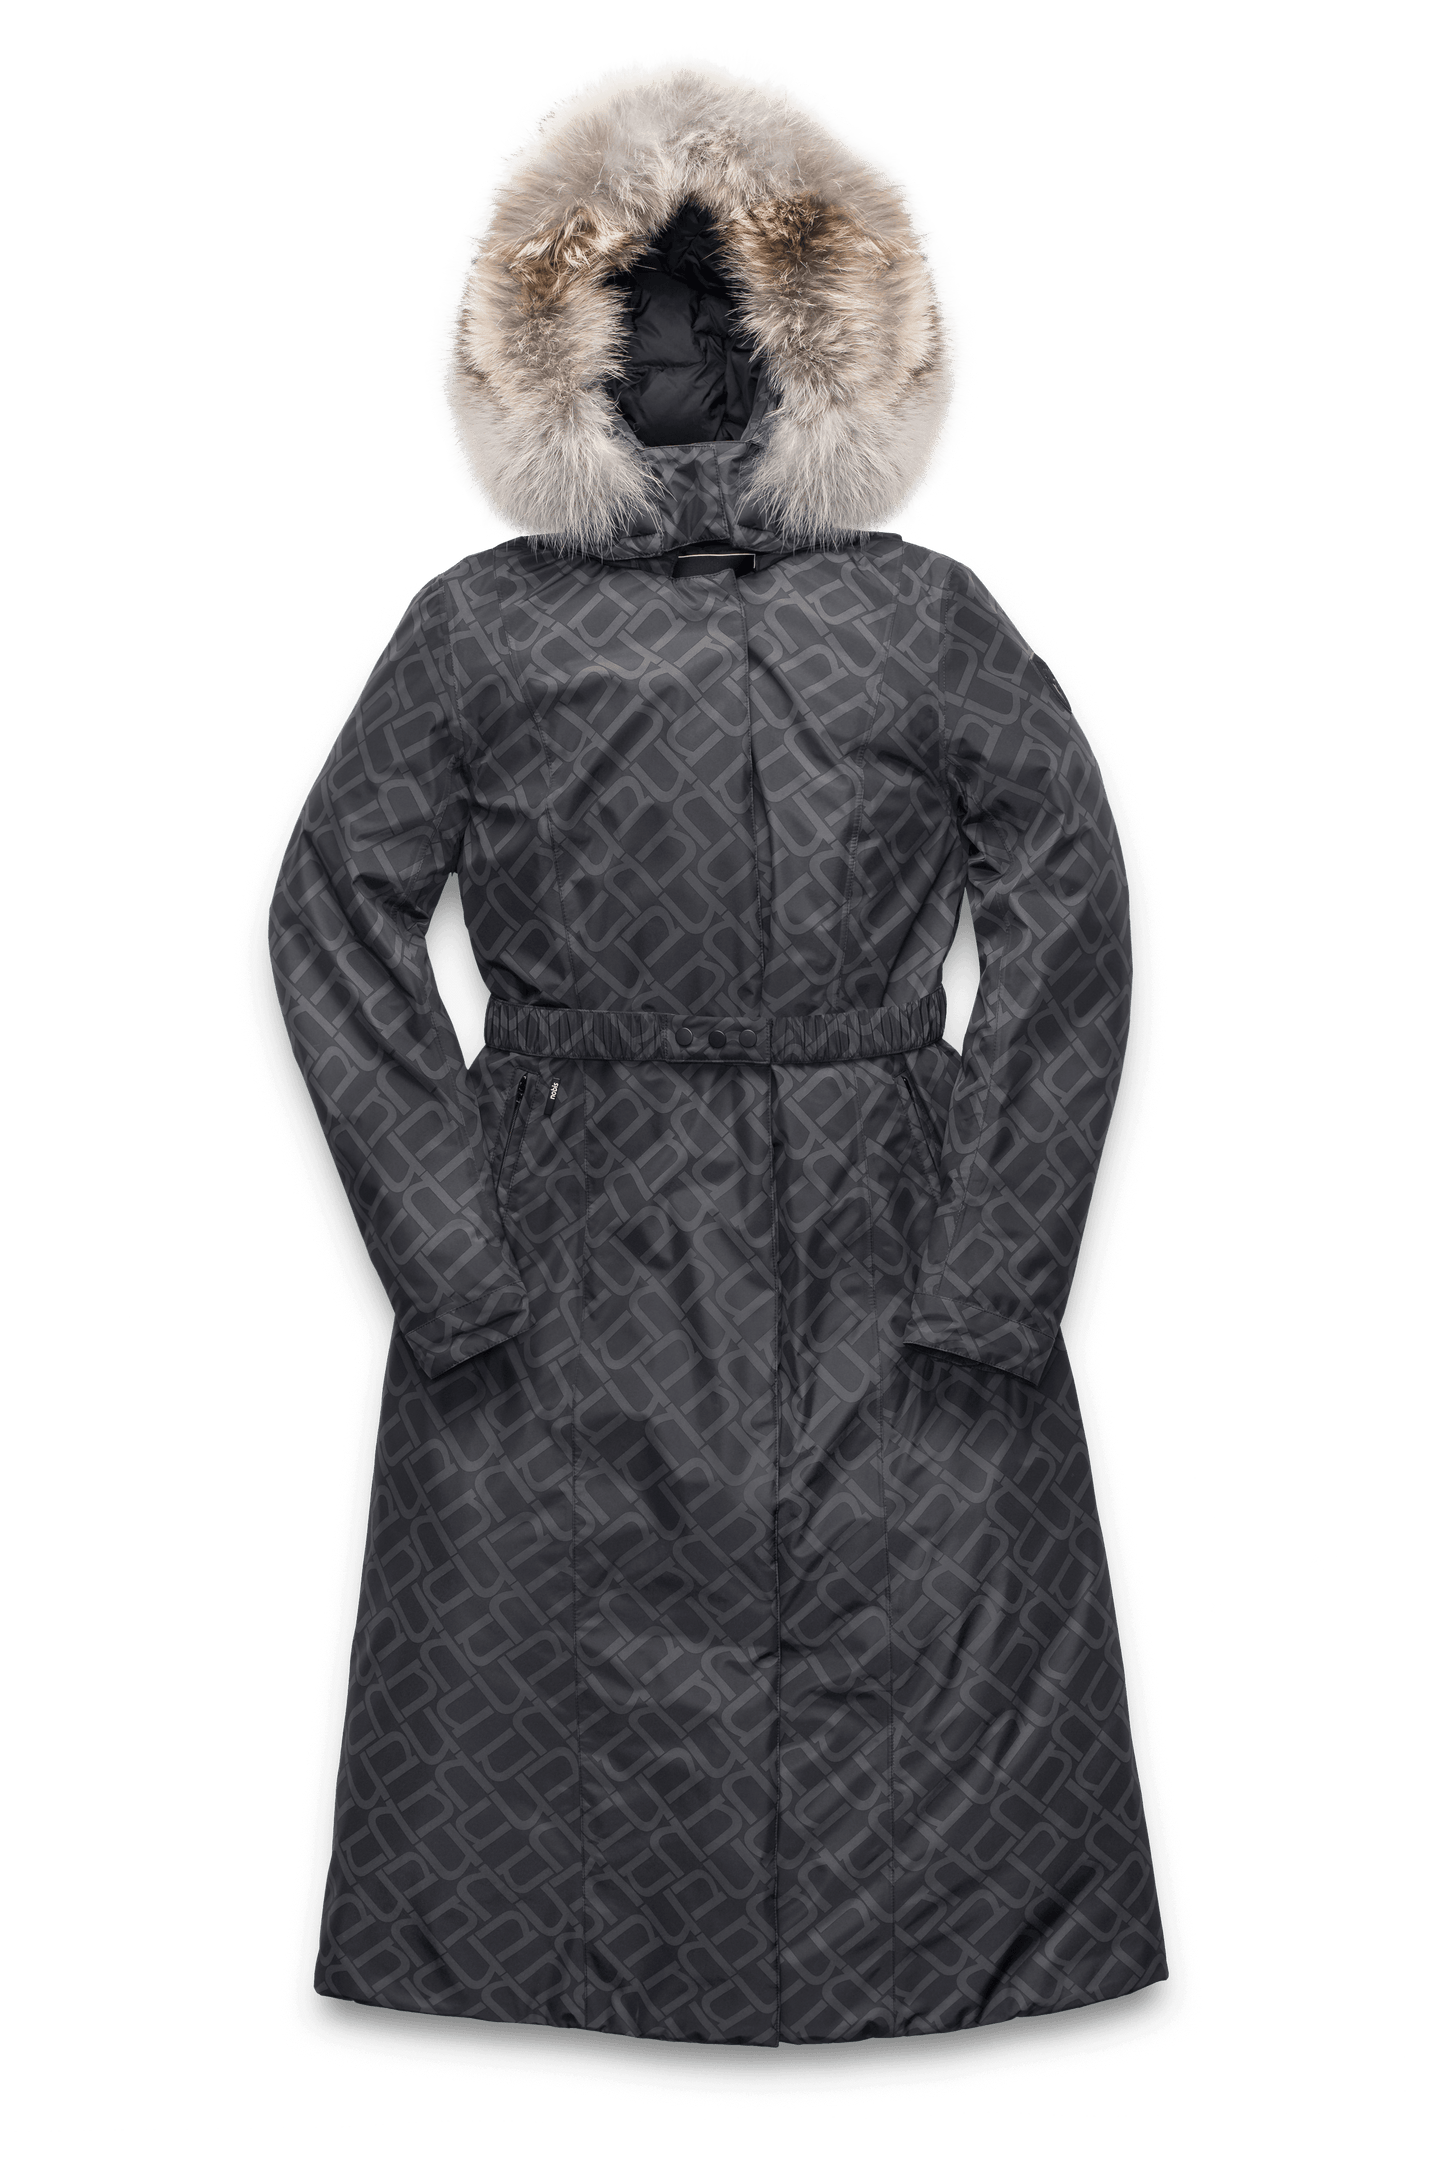 Celest Ladies Duster Parka in knee length, Canadian duck down insulation, removable hood and coyote fur trim, with adjustable belt, in Dark Monogram